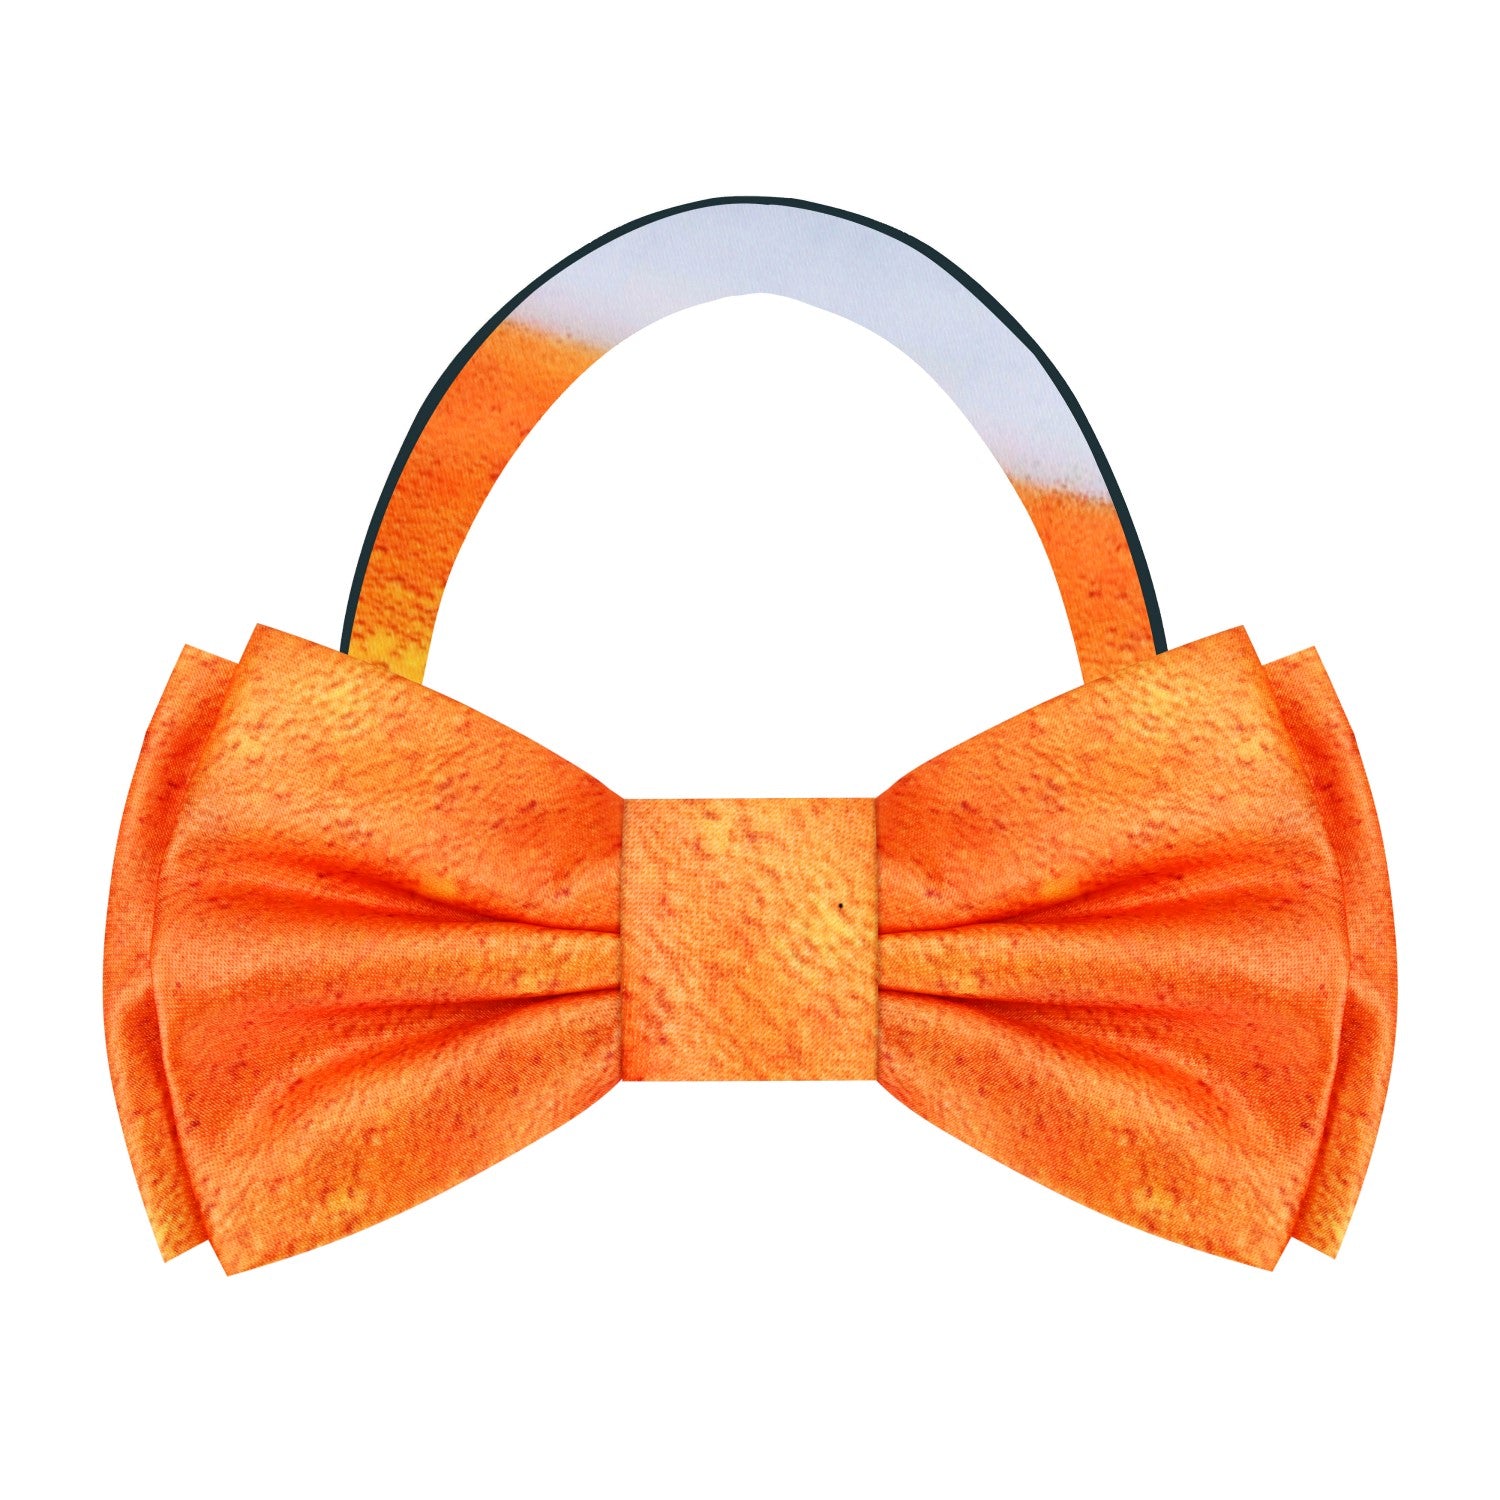 Golden Amber and White Fresh Draft Beer Bow Tie Pre Tied